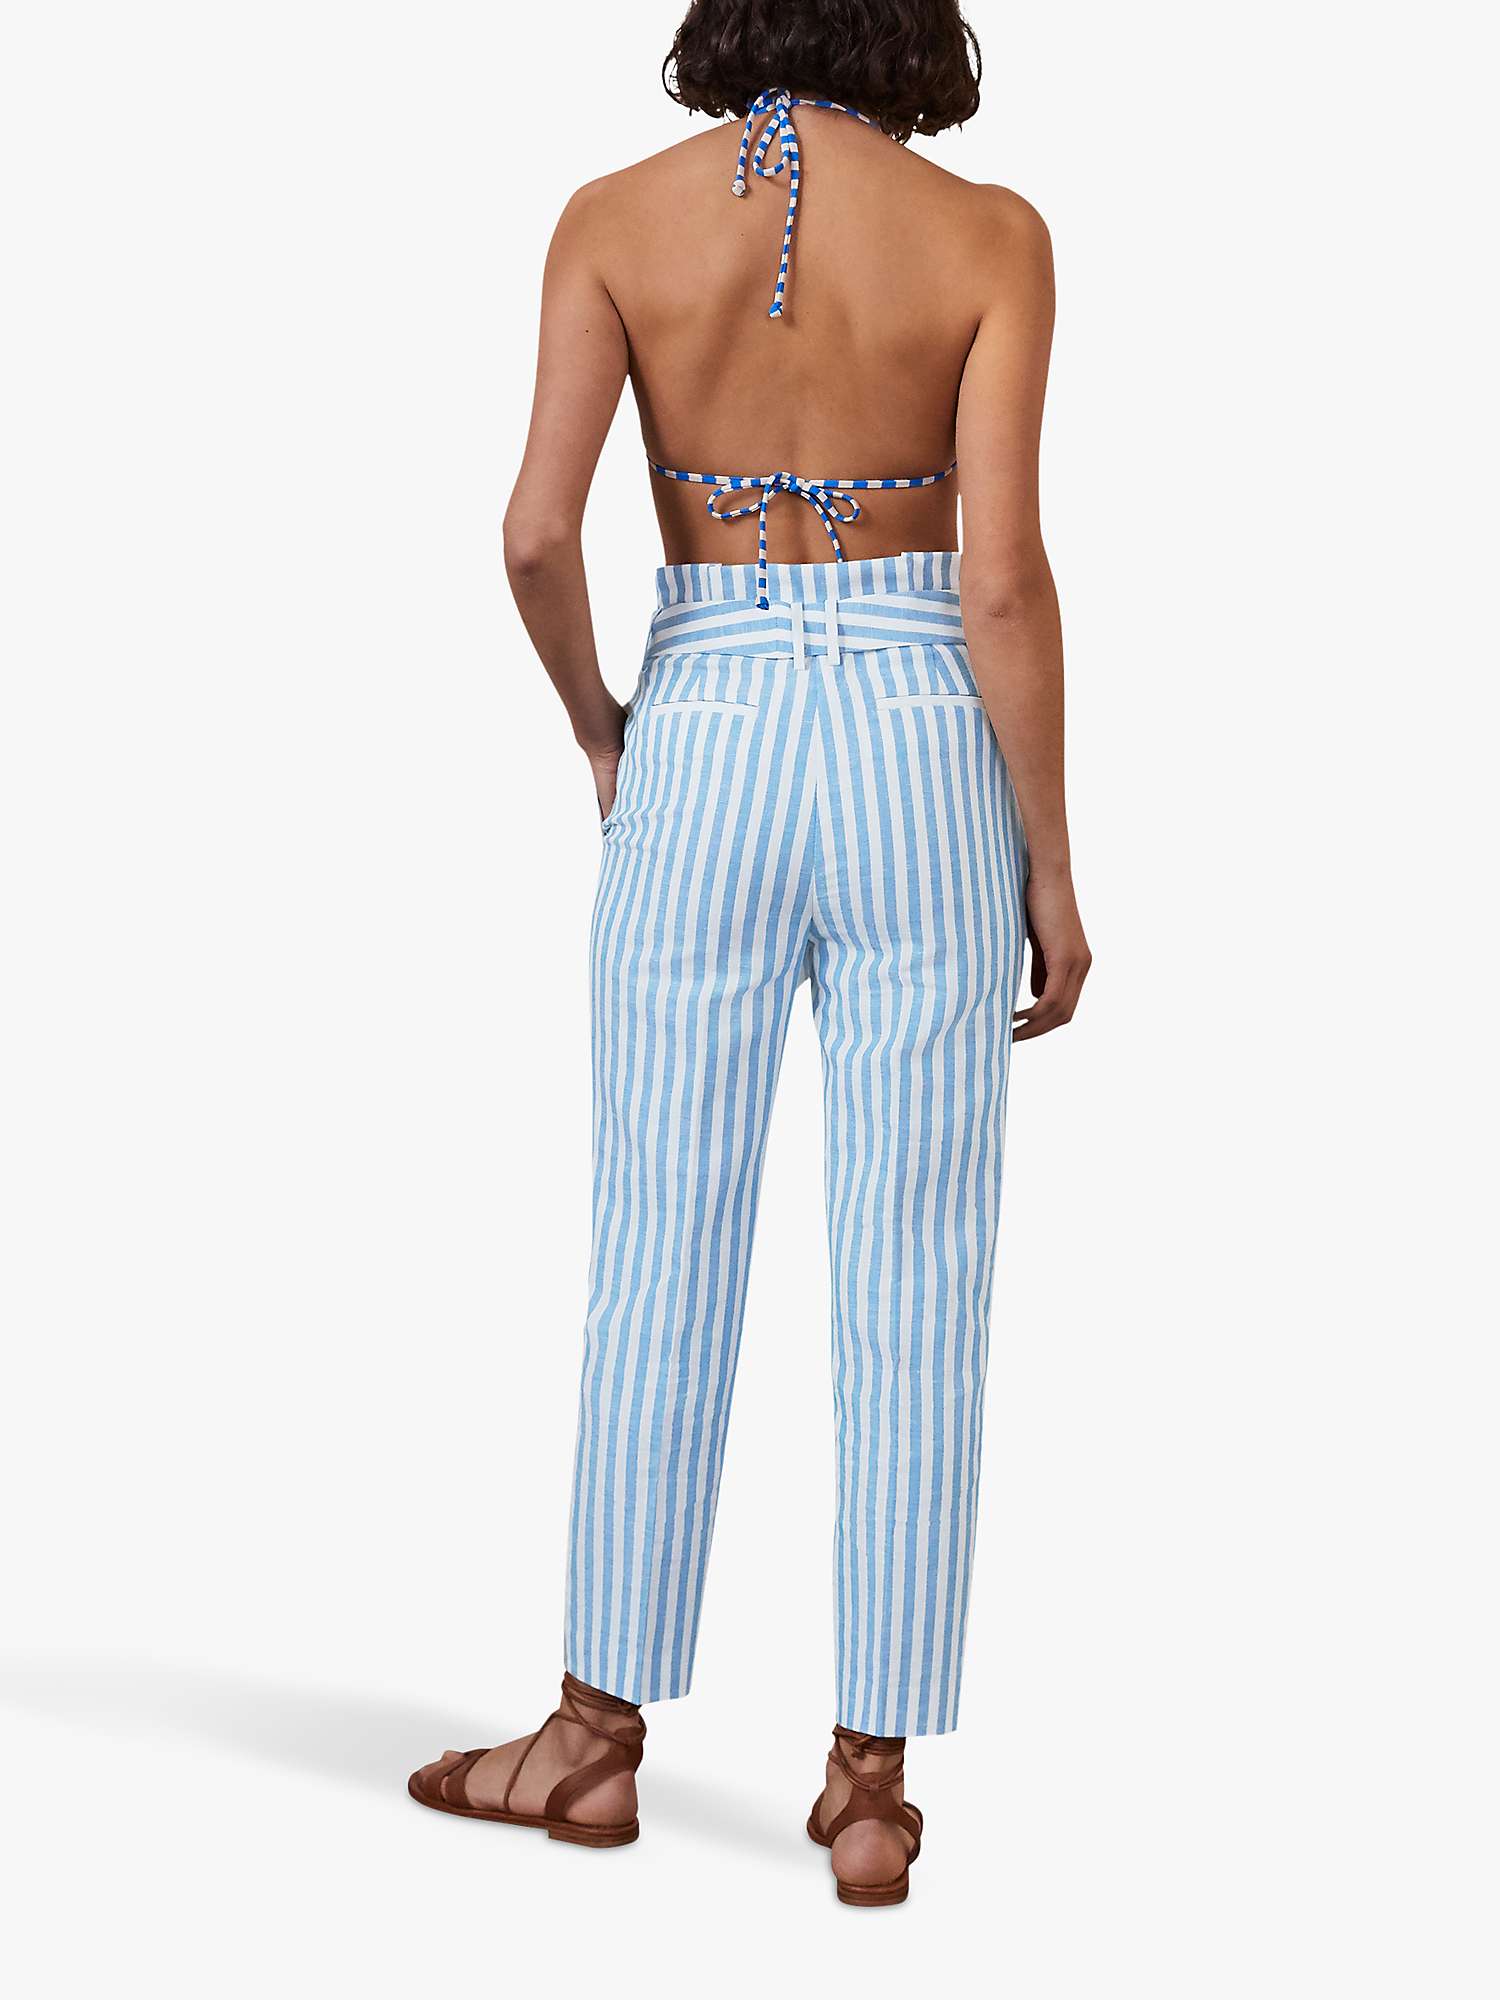 Buy Boden Ludgate Stripe Trousers, Moroccan Blue Online at johnlewis.com